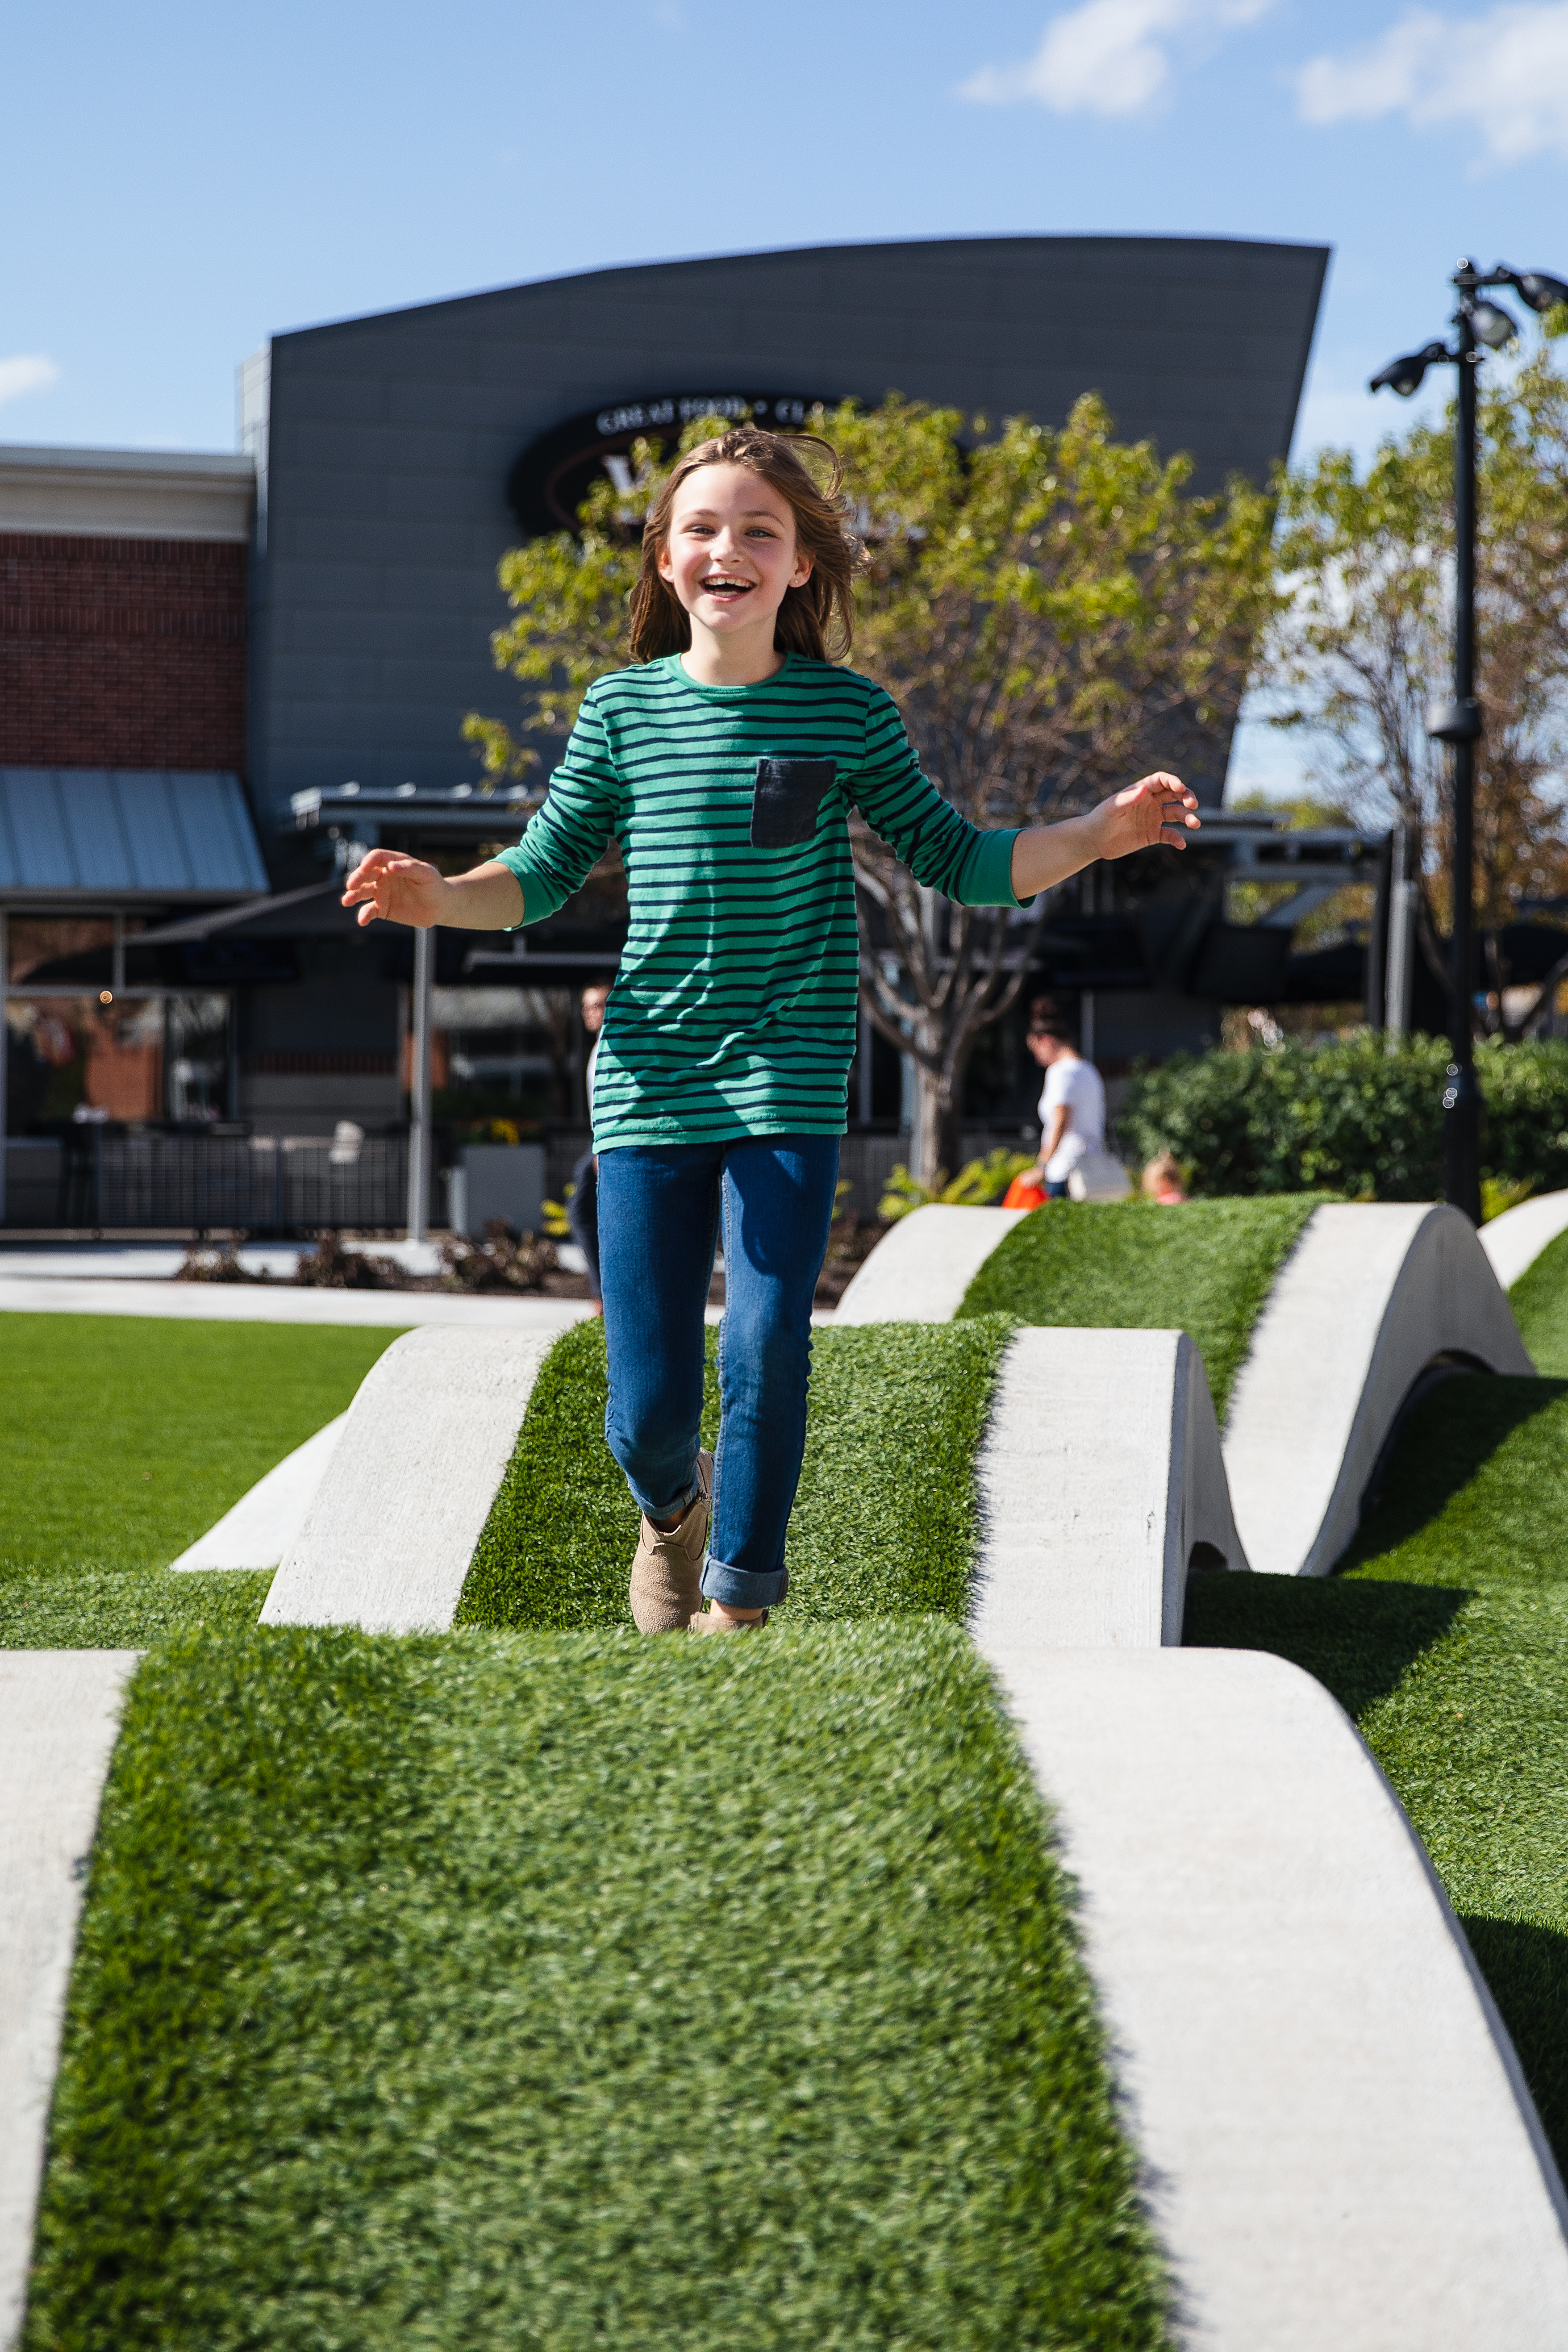 The Lawn at Legends Outlets - Legends Outlets Kansas City - Outlet Mall,  Deals, Restaurants, Entertainment, Events and Activities